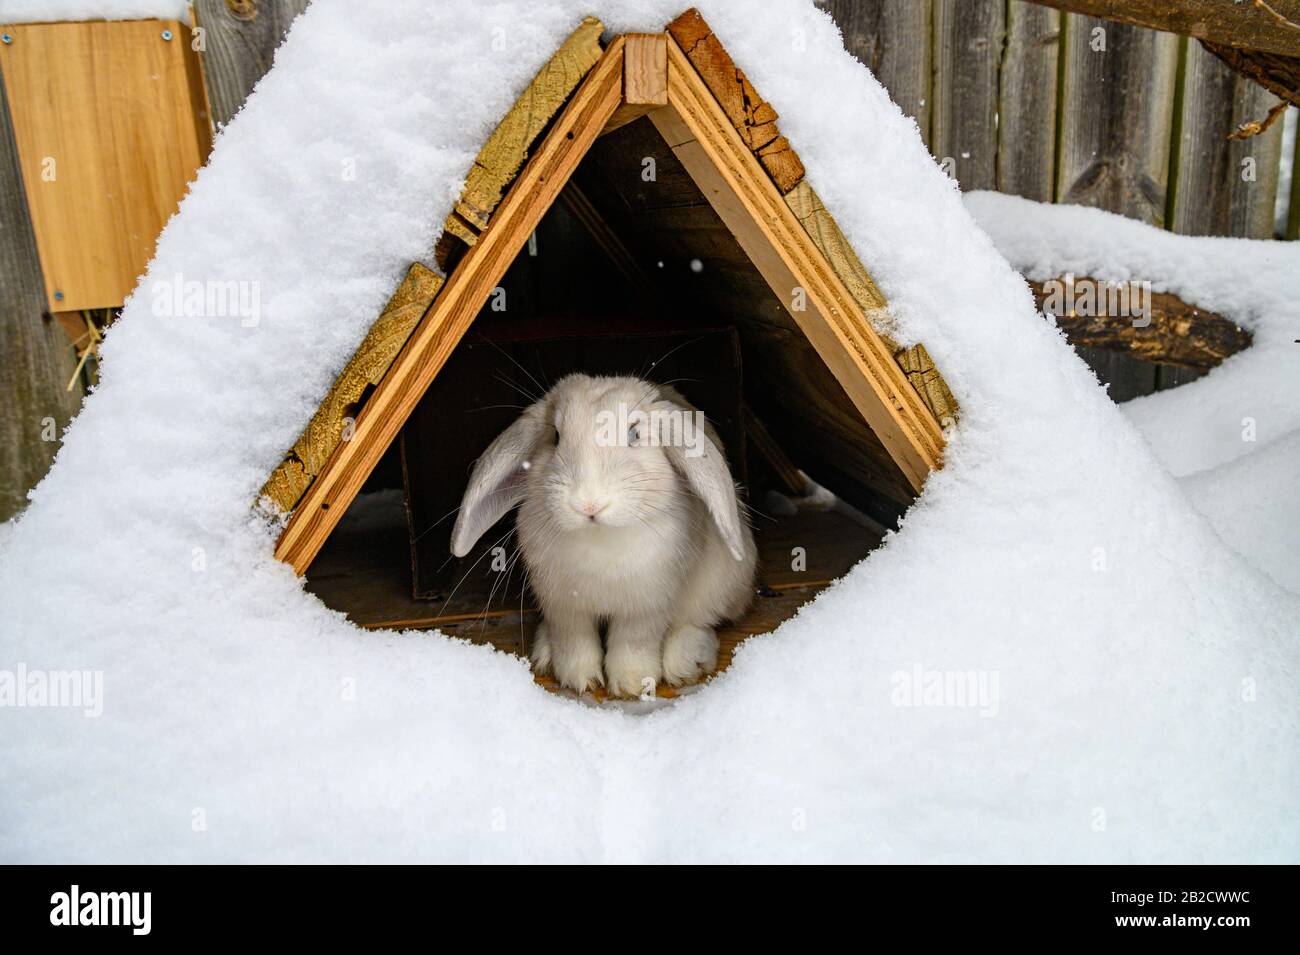 A white Holland lop rabbit stands in a wooden shelter during winter. Stock Photo